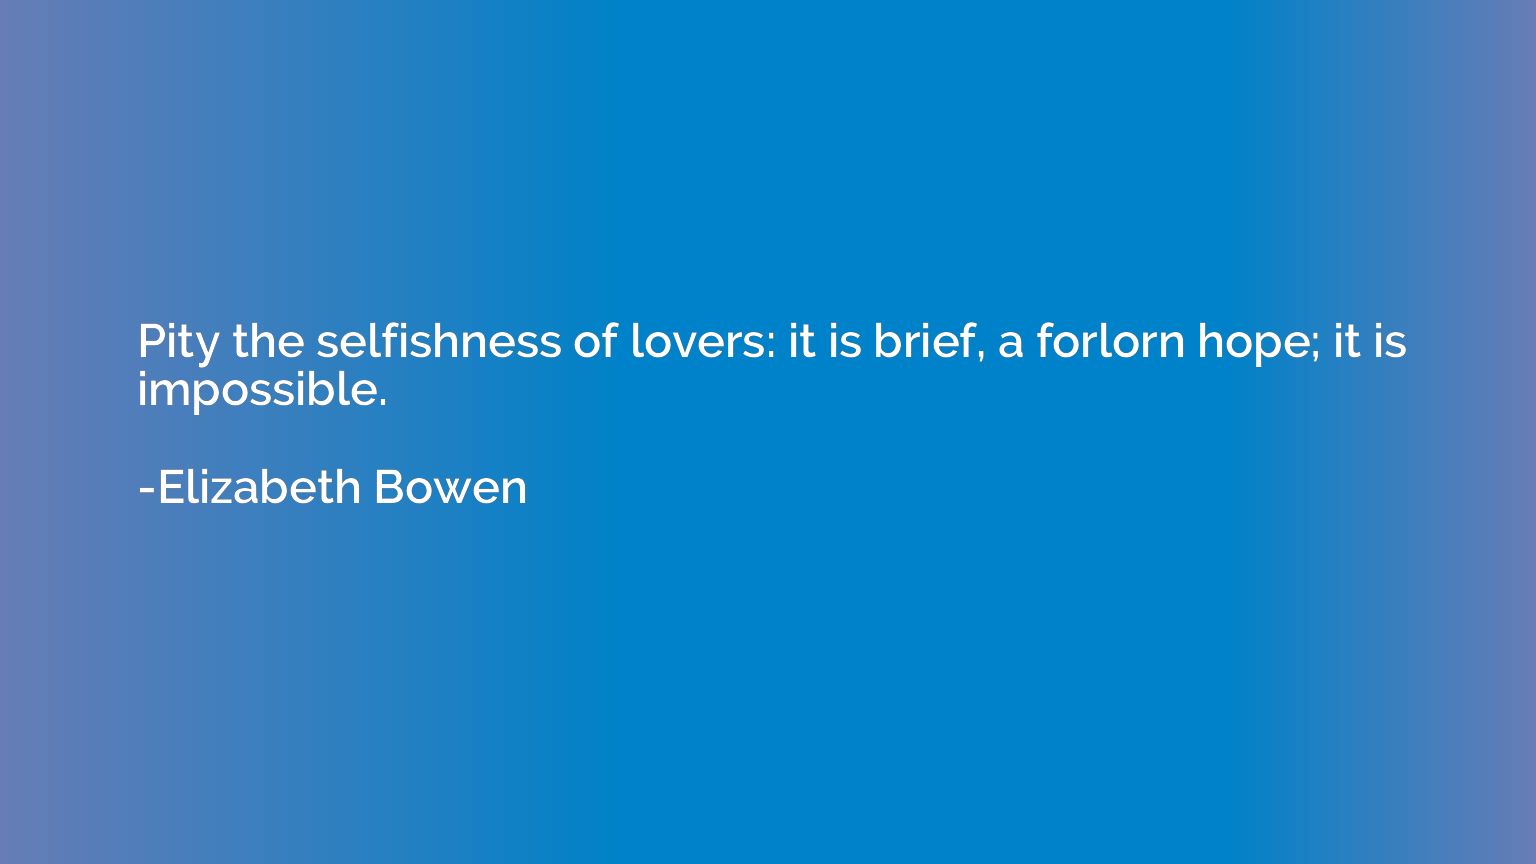 Pity the selfishness of lovers: it is brief, a forlorn hope;